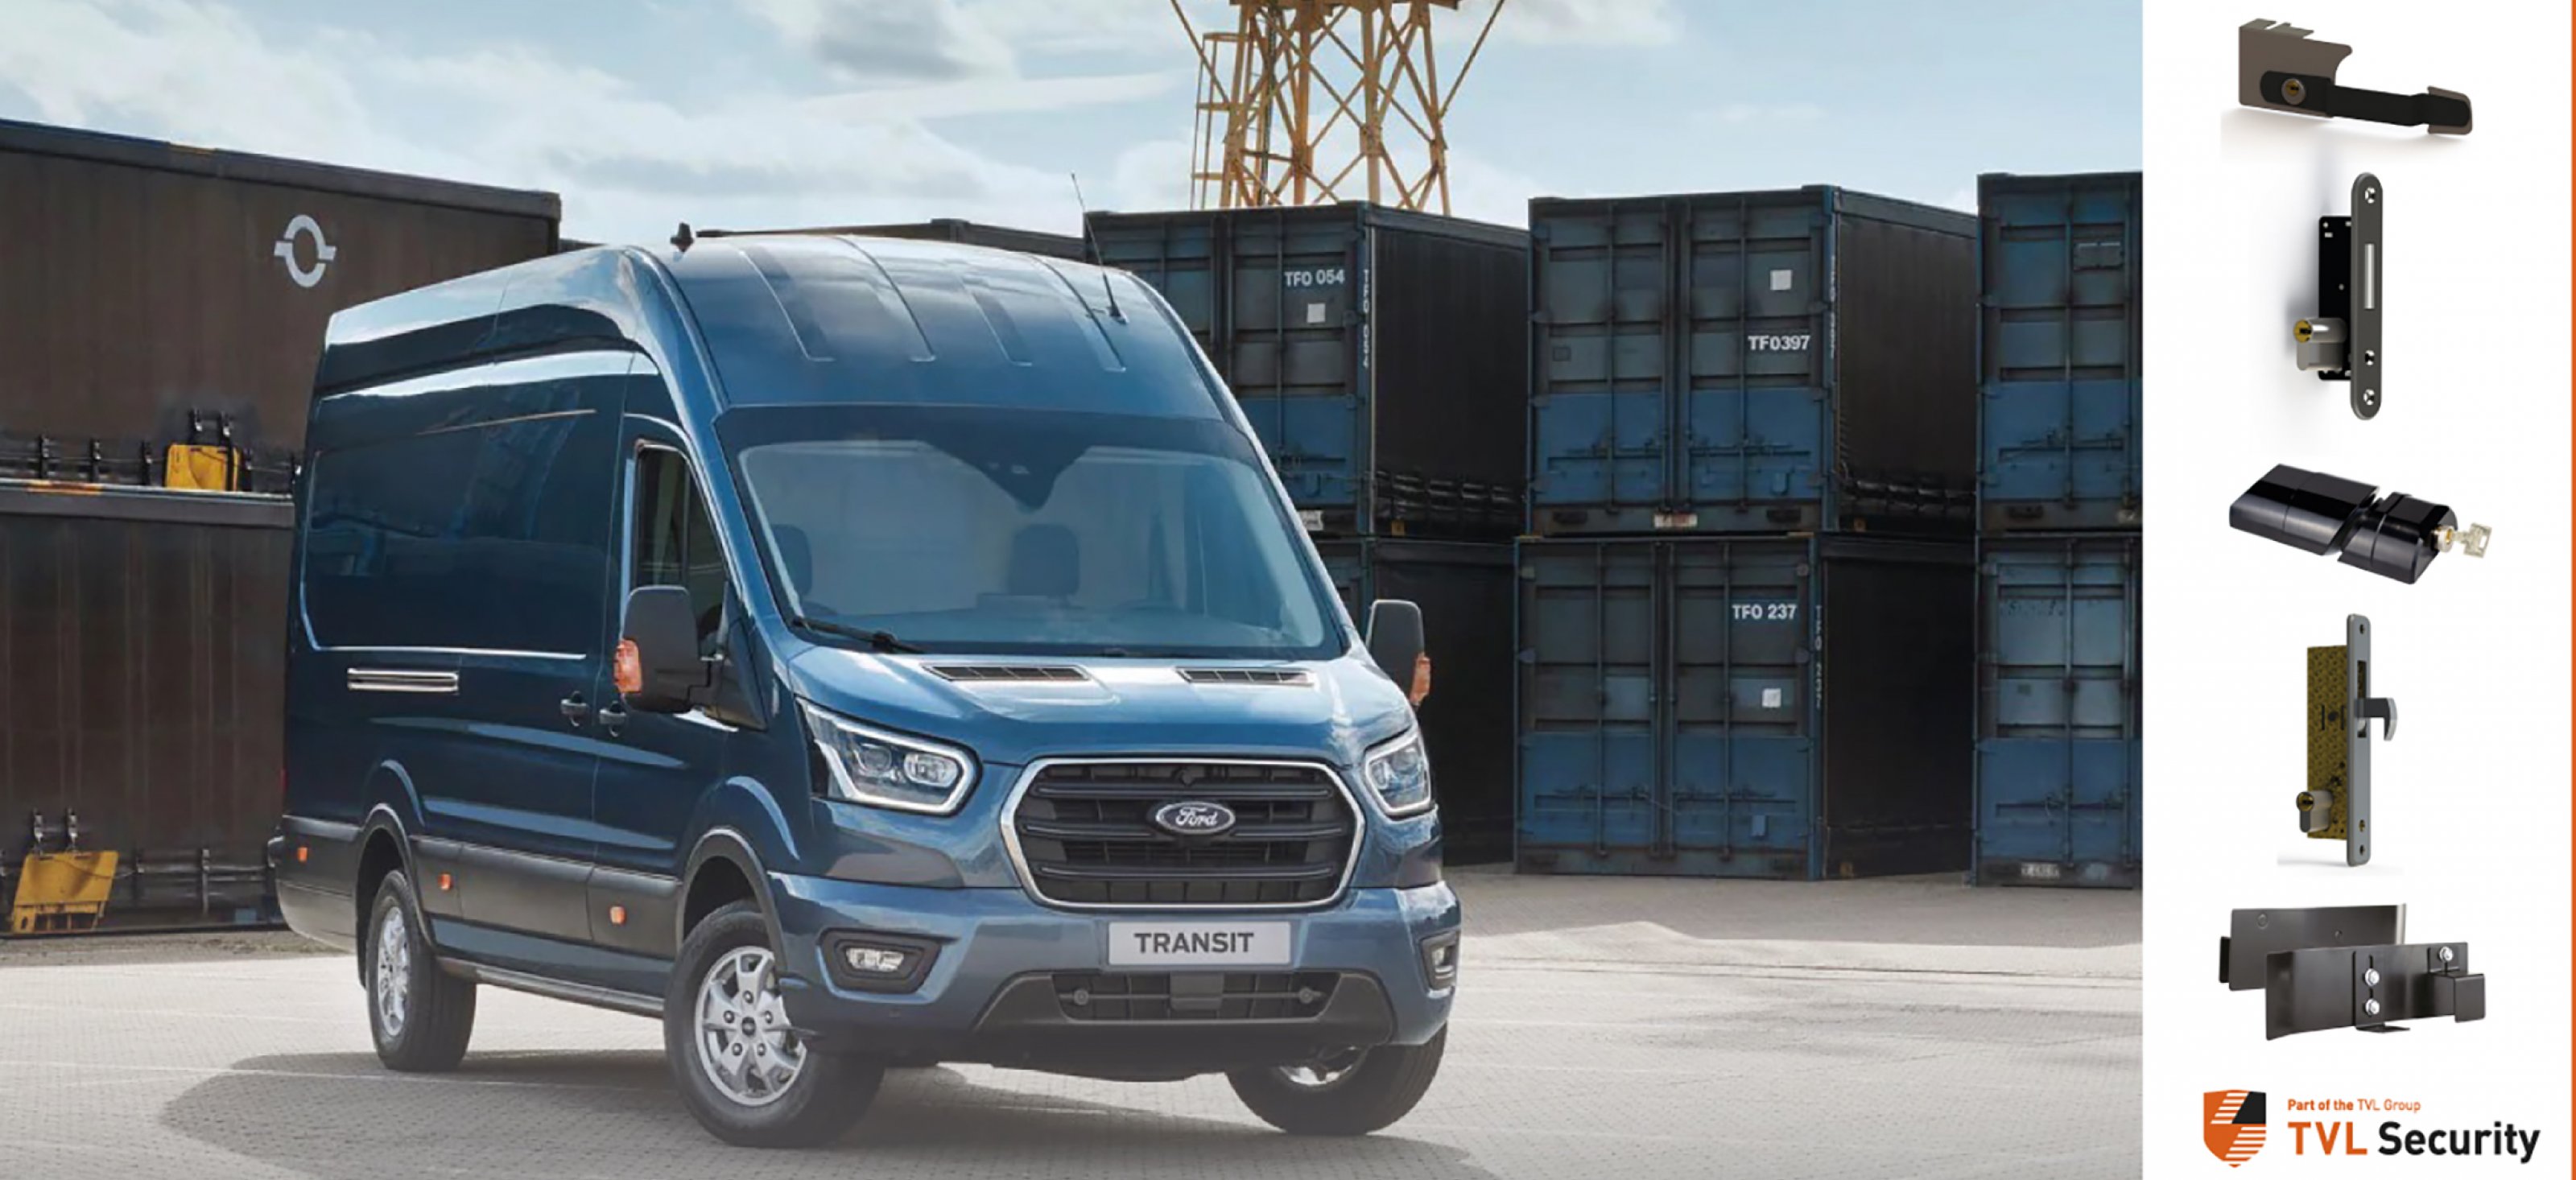 Van Security – Ford and TVL Security bring customers aftermarket solutions as factory-fit options